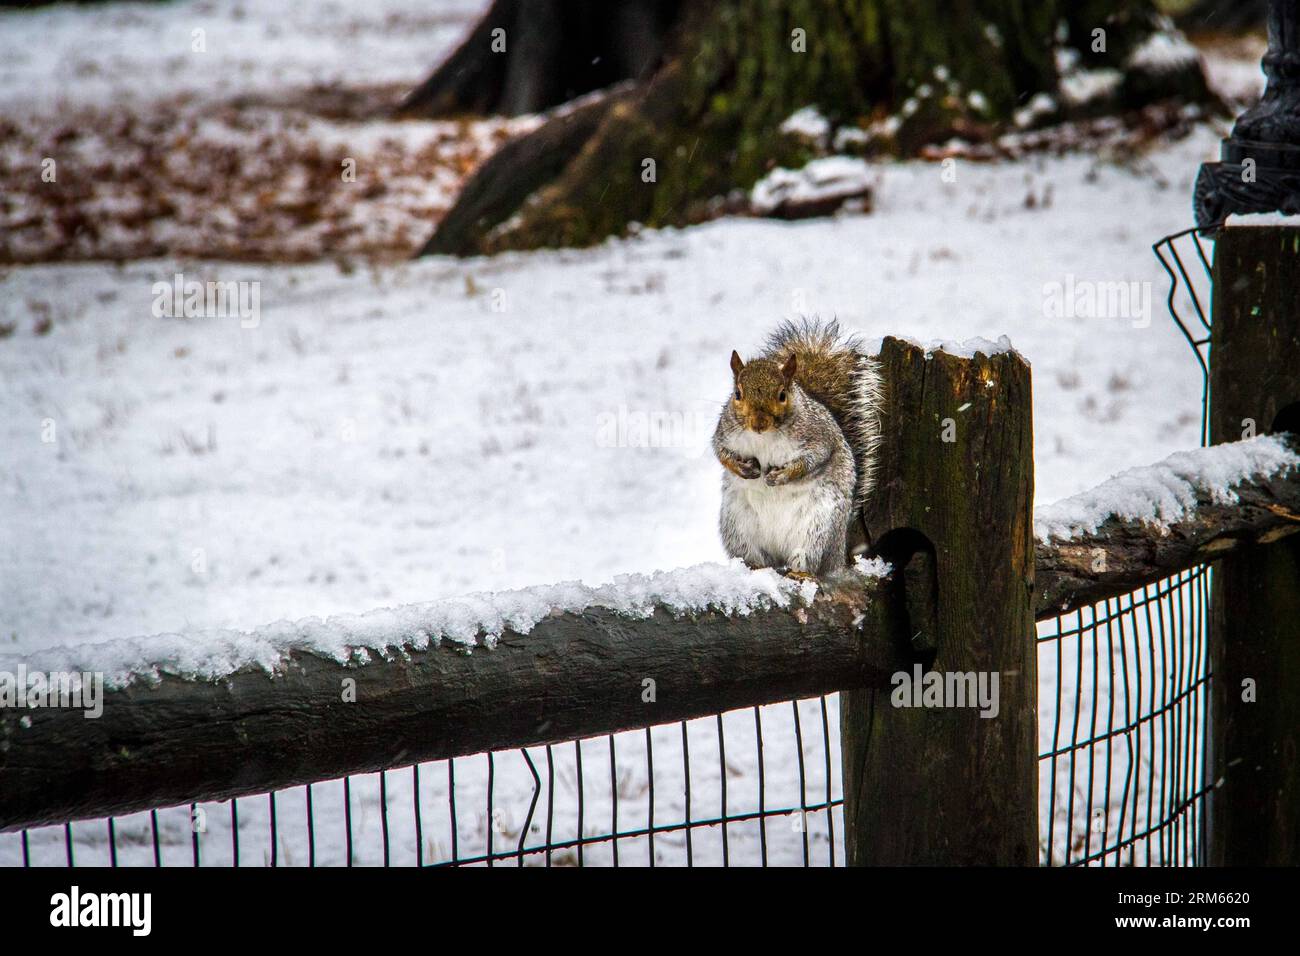 Bildnummer: 60815609  Datum: 10.12.2013  Copyright: imago/Xinhua     (131210) -- NEW YORK, Dec. 10, 2013 -- A squirrel stands on a fence during a snowfall in Central Park, New York City, United States, on Dec. 10, 2013. (Xinhua/Niu Xiaolei) US-NEW YORK-CENTRAL PARK-SNOW PUBLICATIONxNOTxINxCHN Winter xas x0x 2013 quer Stock Photo